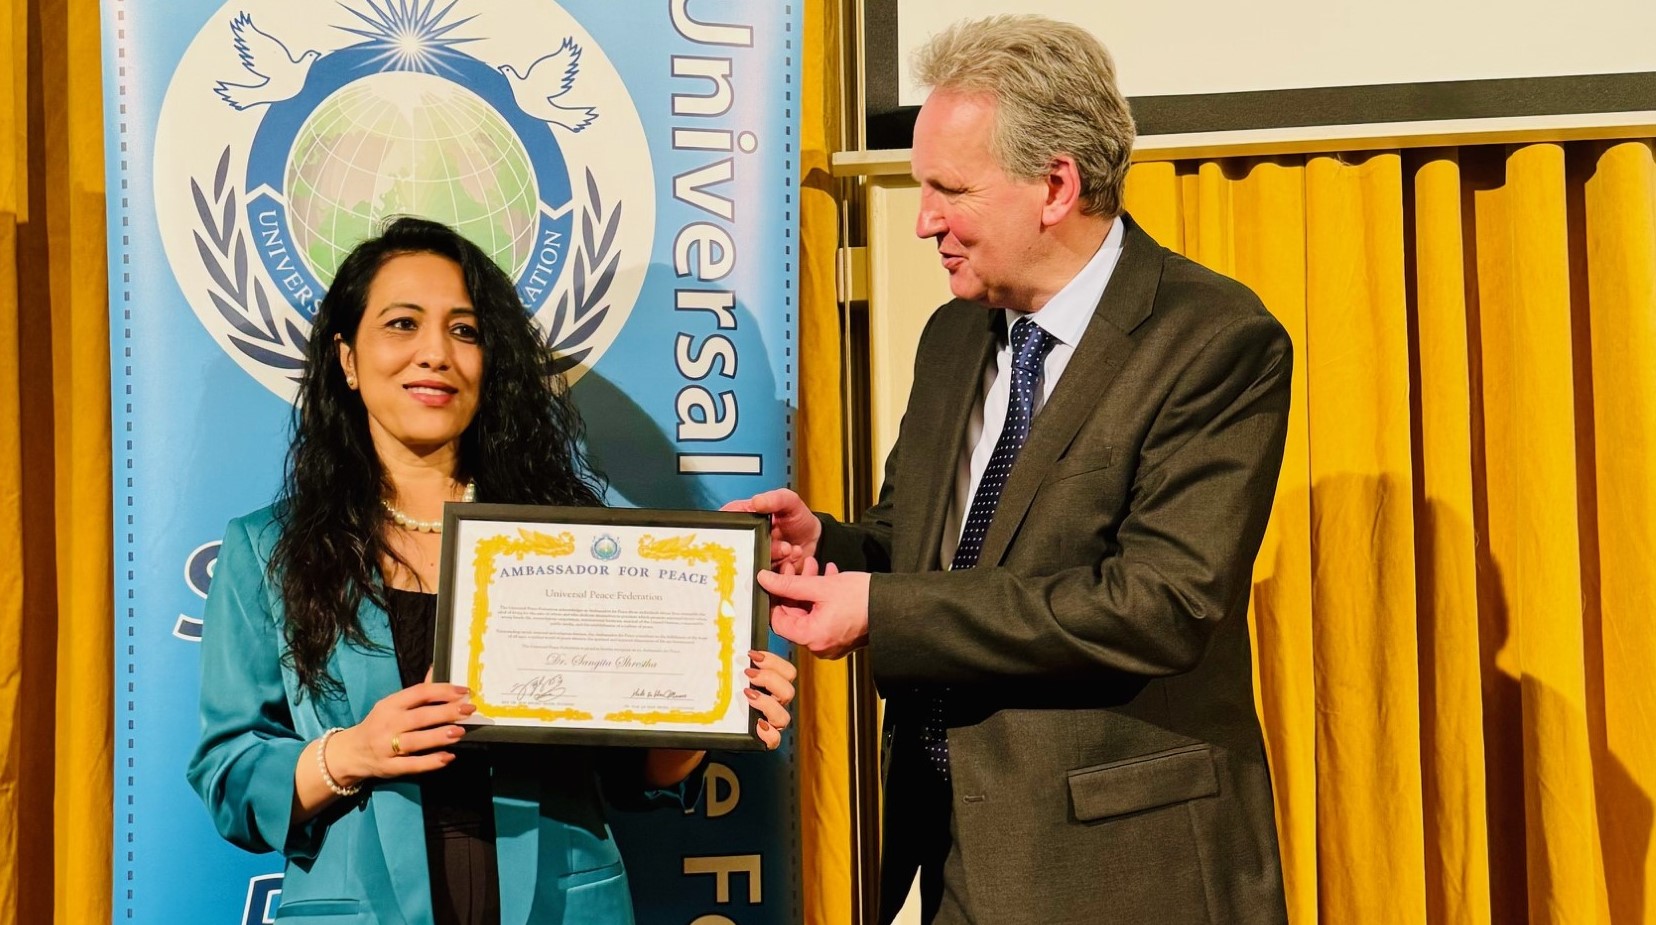 Feed the Minds campaigner Sangita Shrestha awarded for advocacy of women’s rights